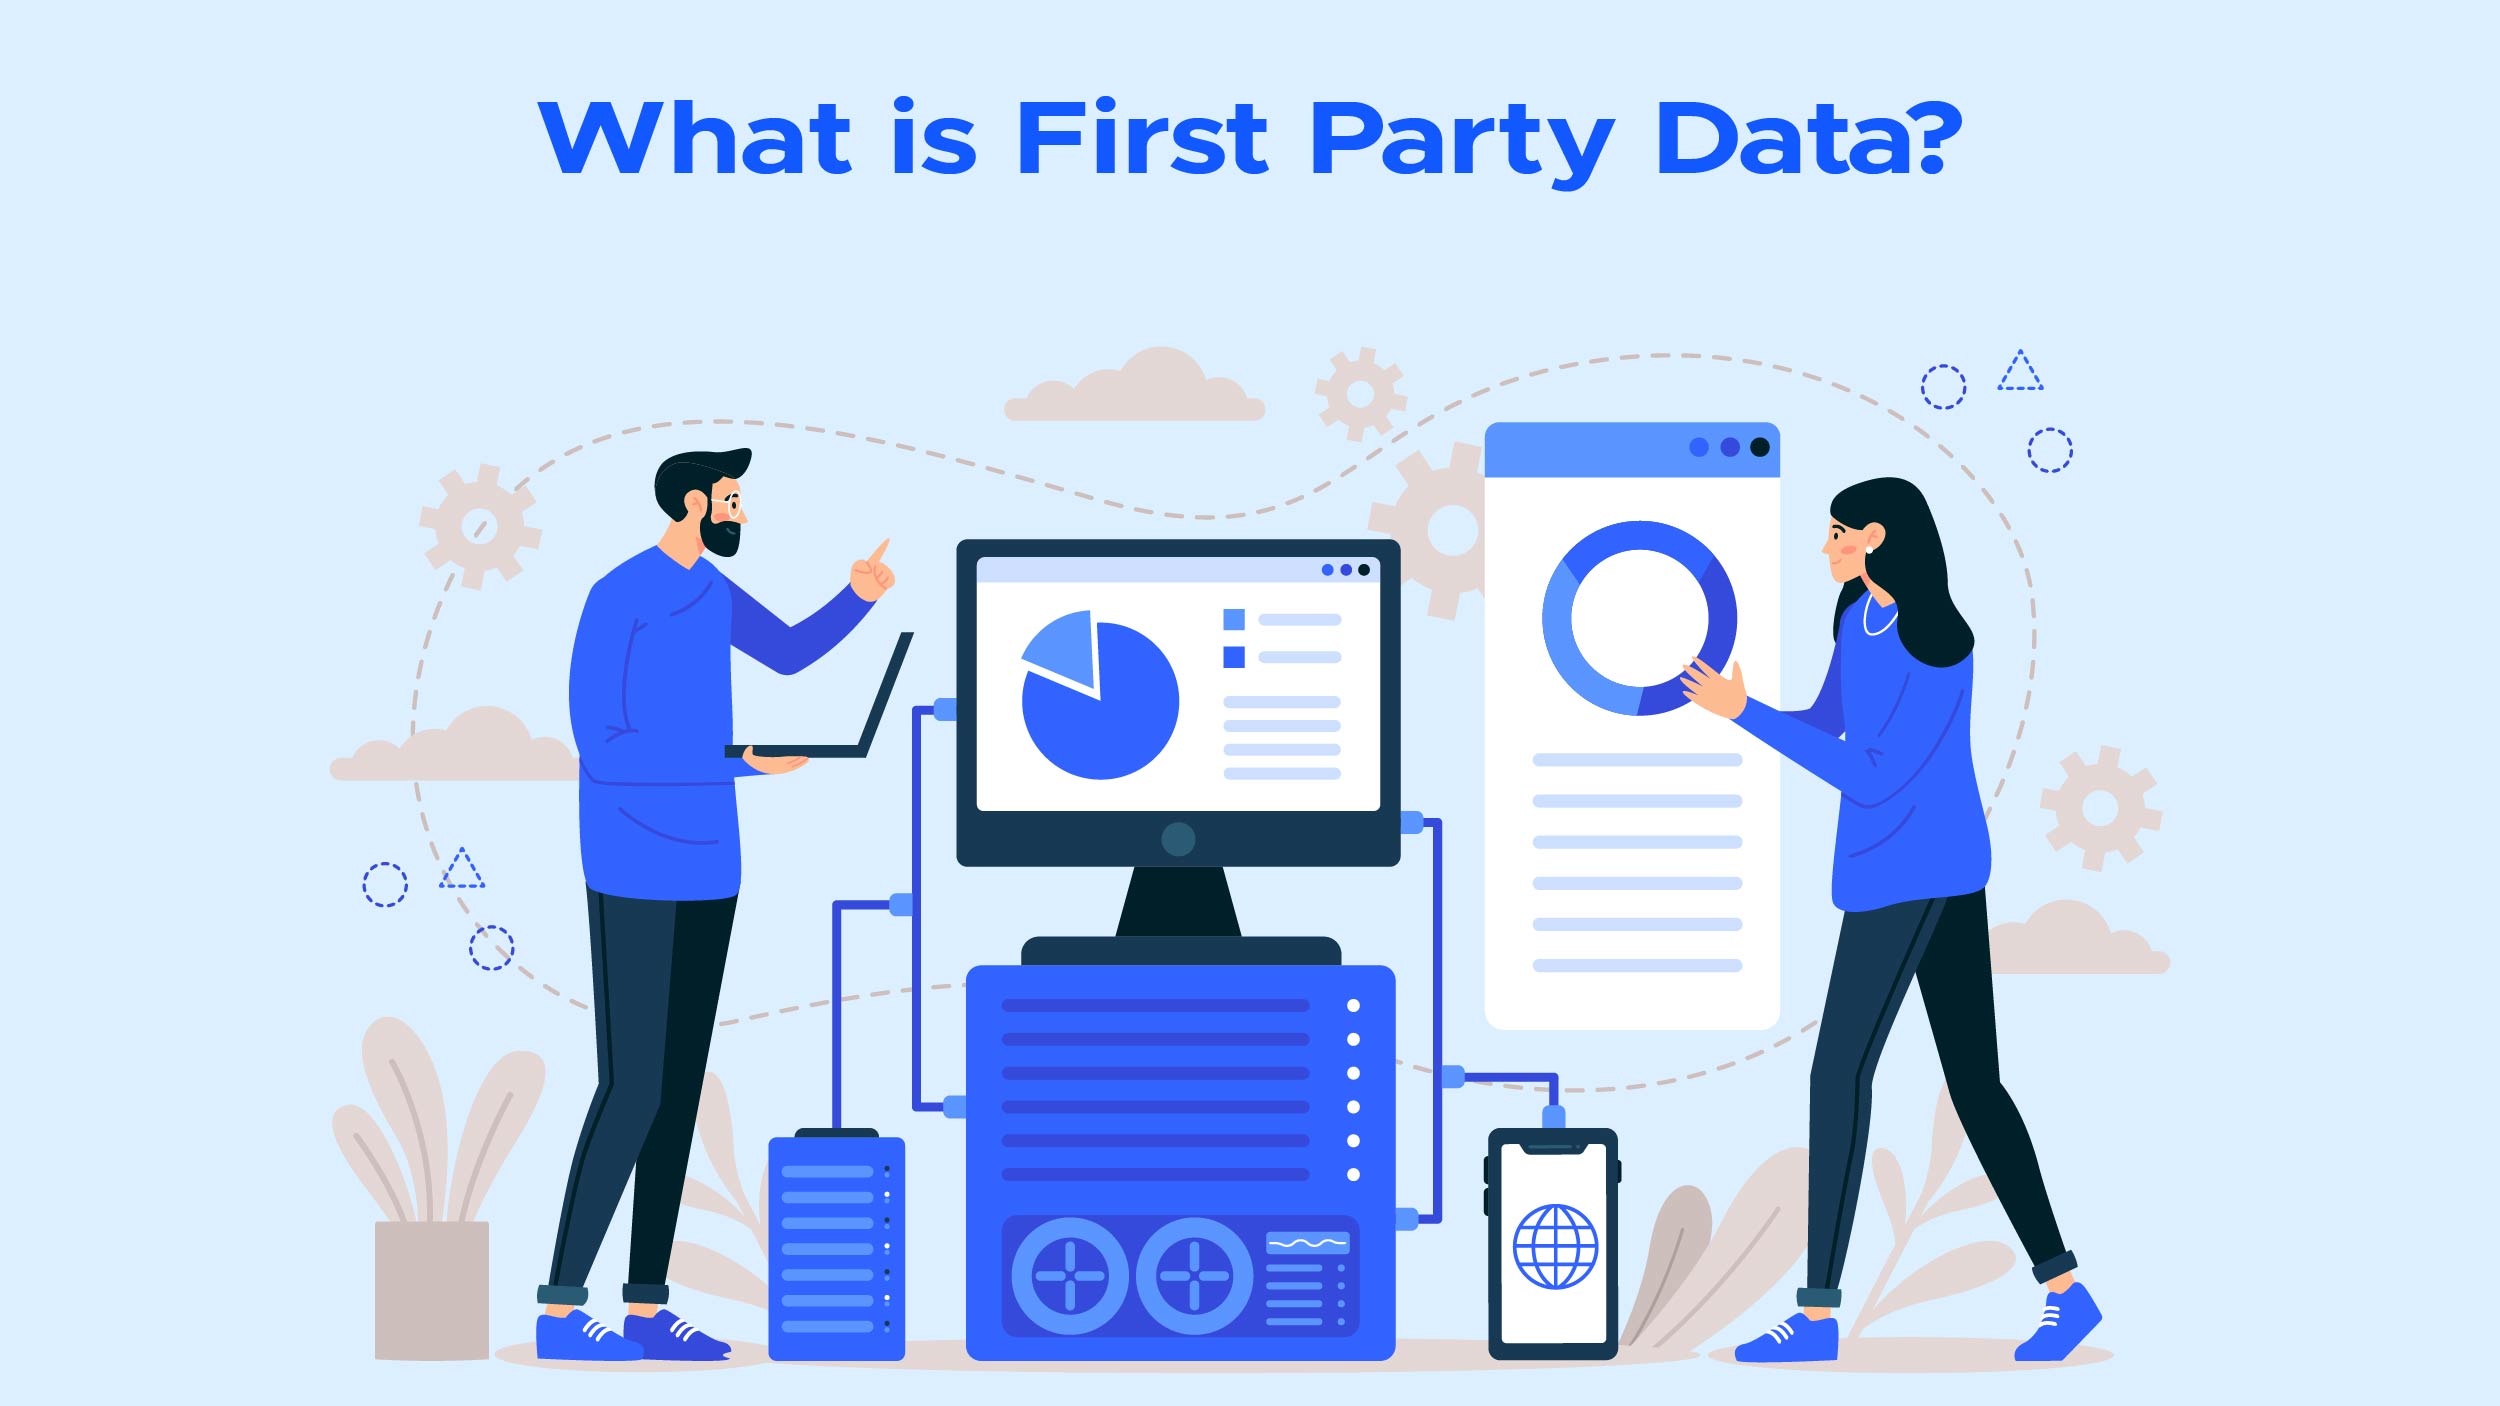 First Party Data